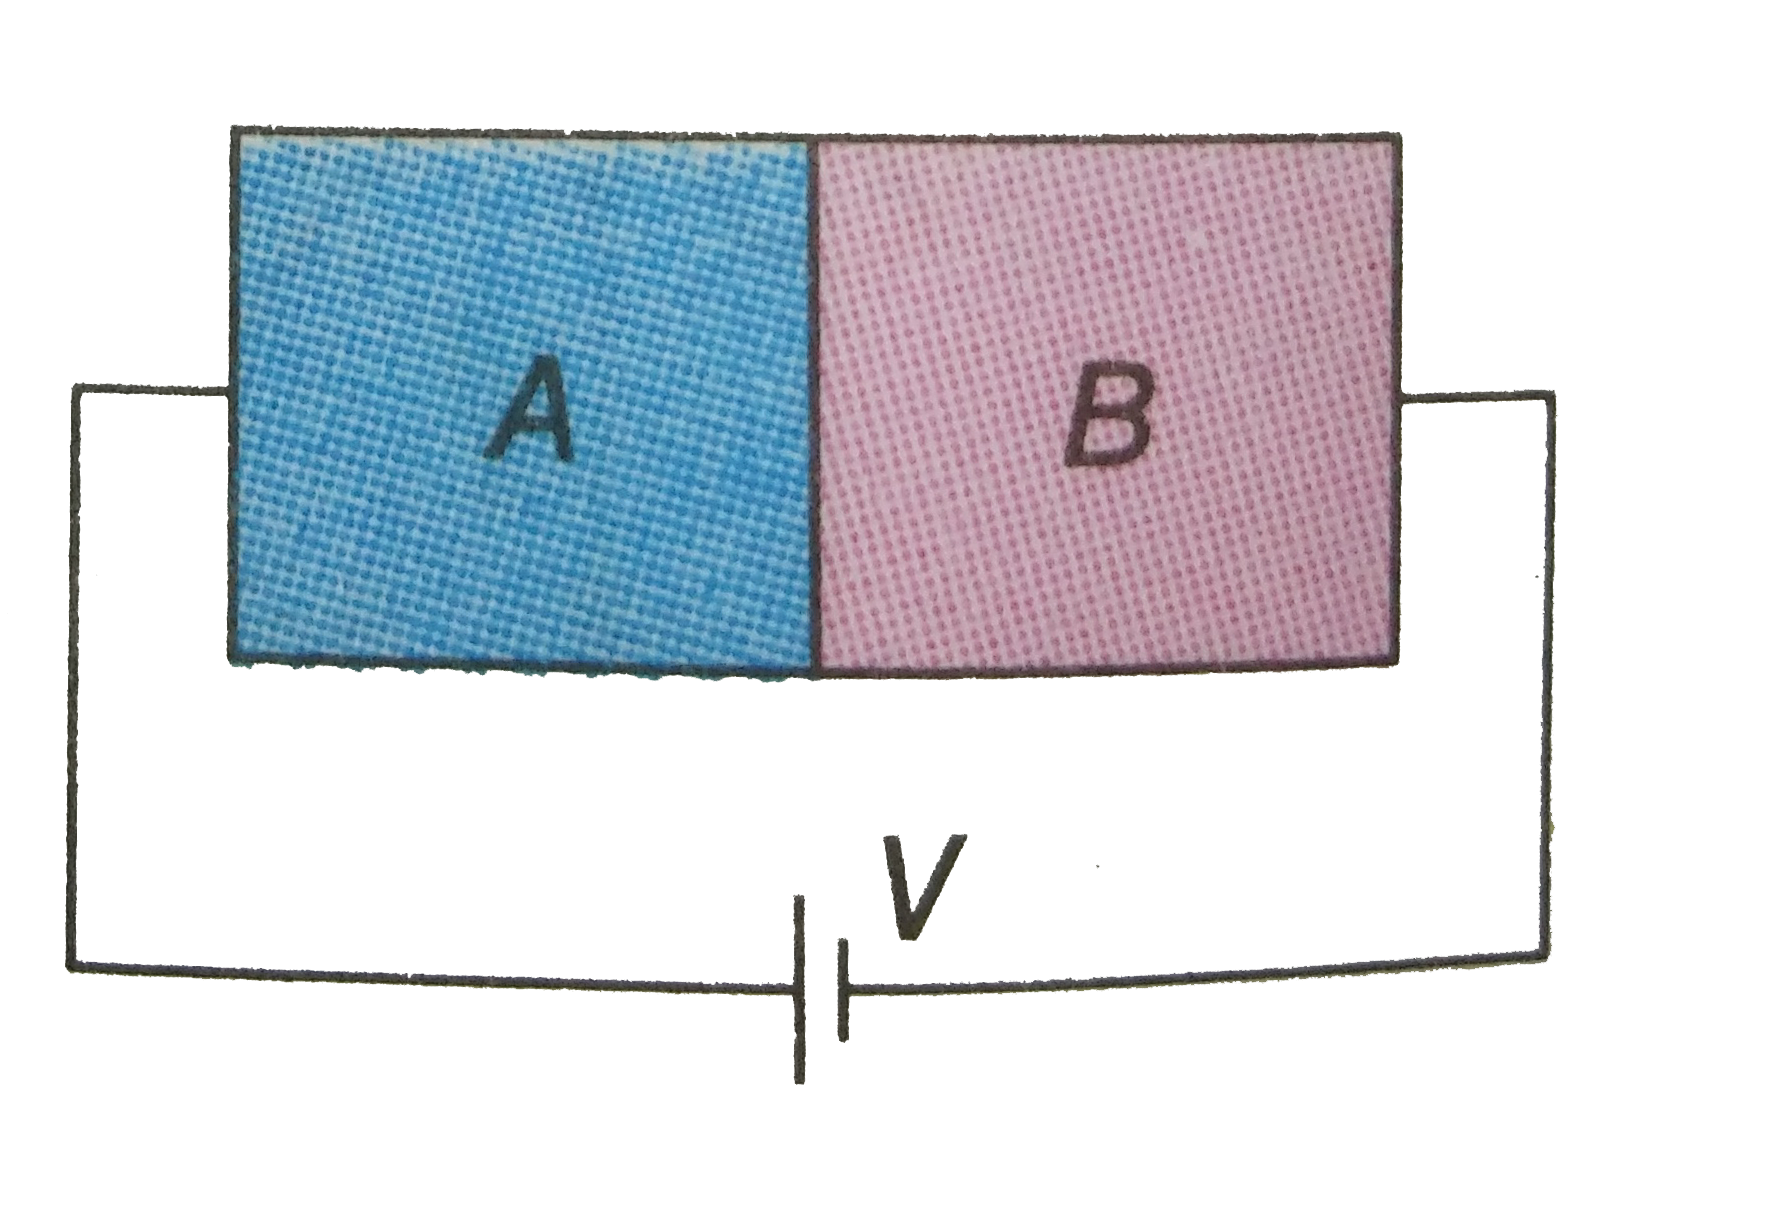 Two sides of a semiconductor germanuim crystal A and B are doped with arsenic and indium, respectively, They are connected to a battery as shown in figure.   The correct graph between current and voltage for the arrangement is